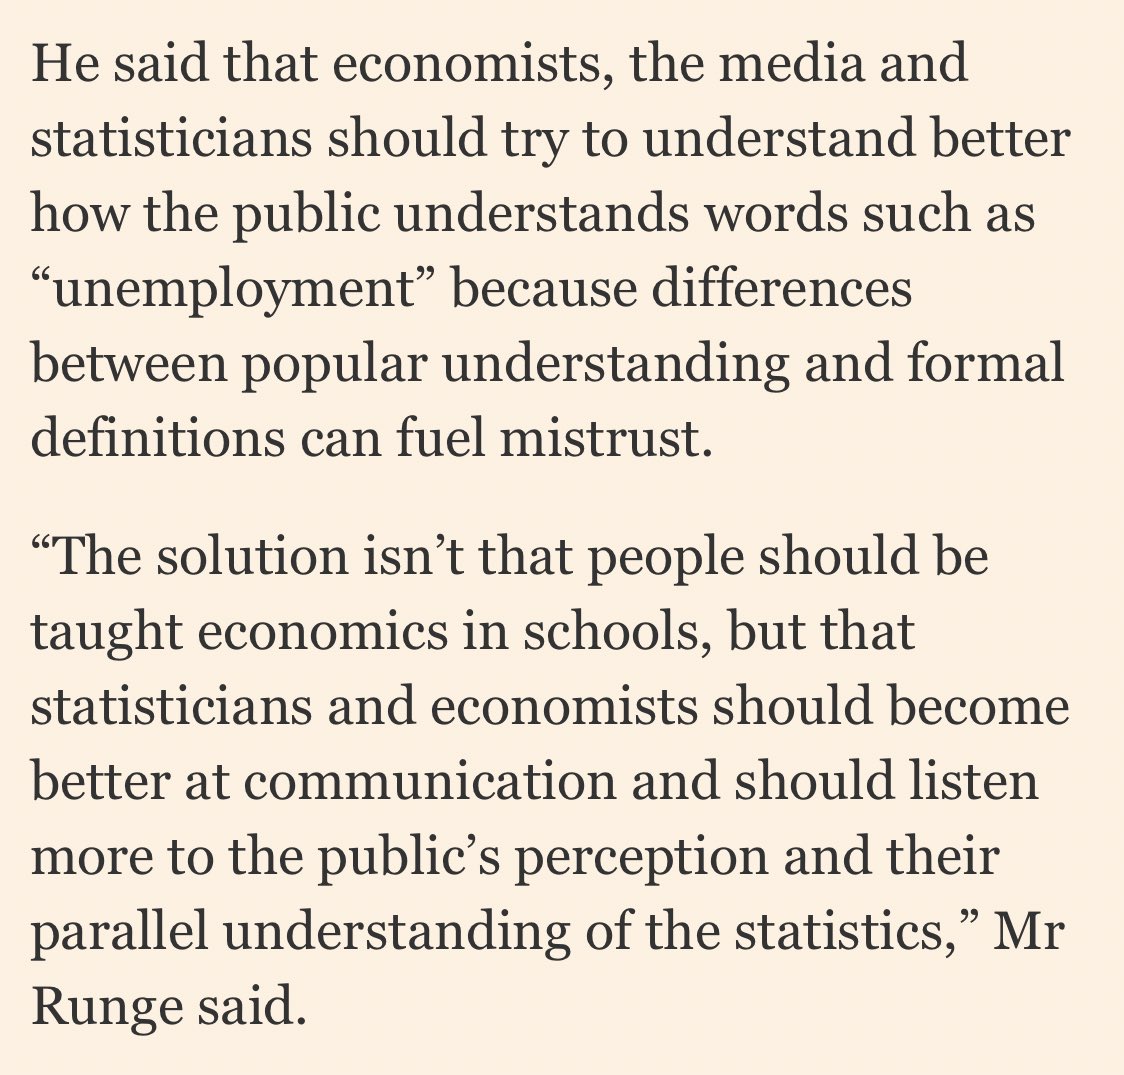 Couldn't agree more with this, from a recent  @ChrisGiles_ story on economic literacy in the UK  https://www.ft.com/content/93821297-96ea-4286-8f01-ccb6fa09161fOur job is to communicate clearly to people. If they are confused, that's on us much more than on them.